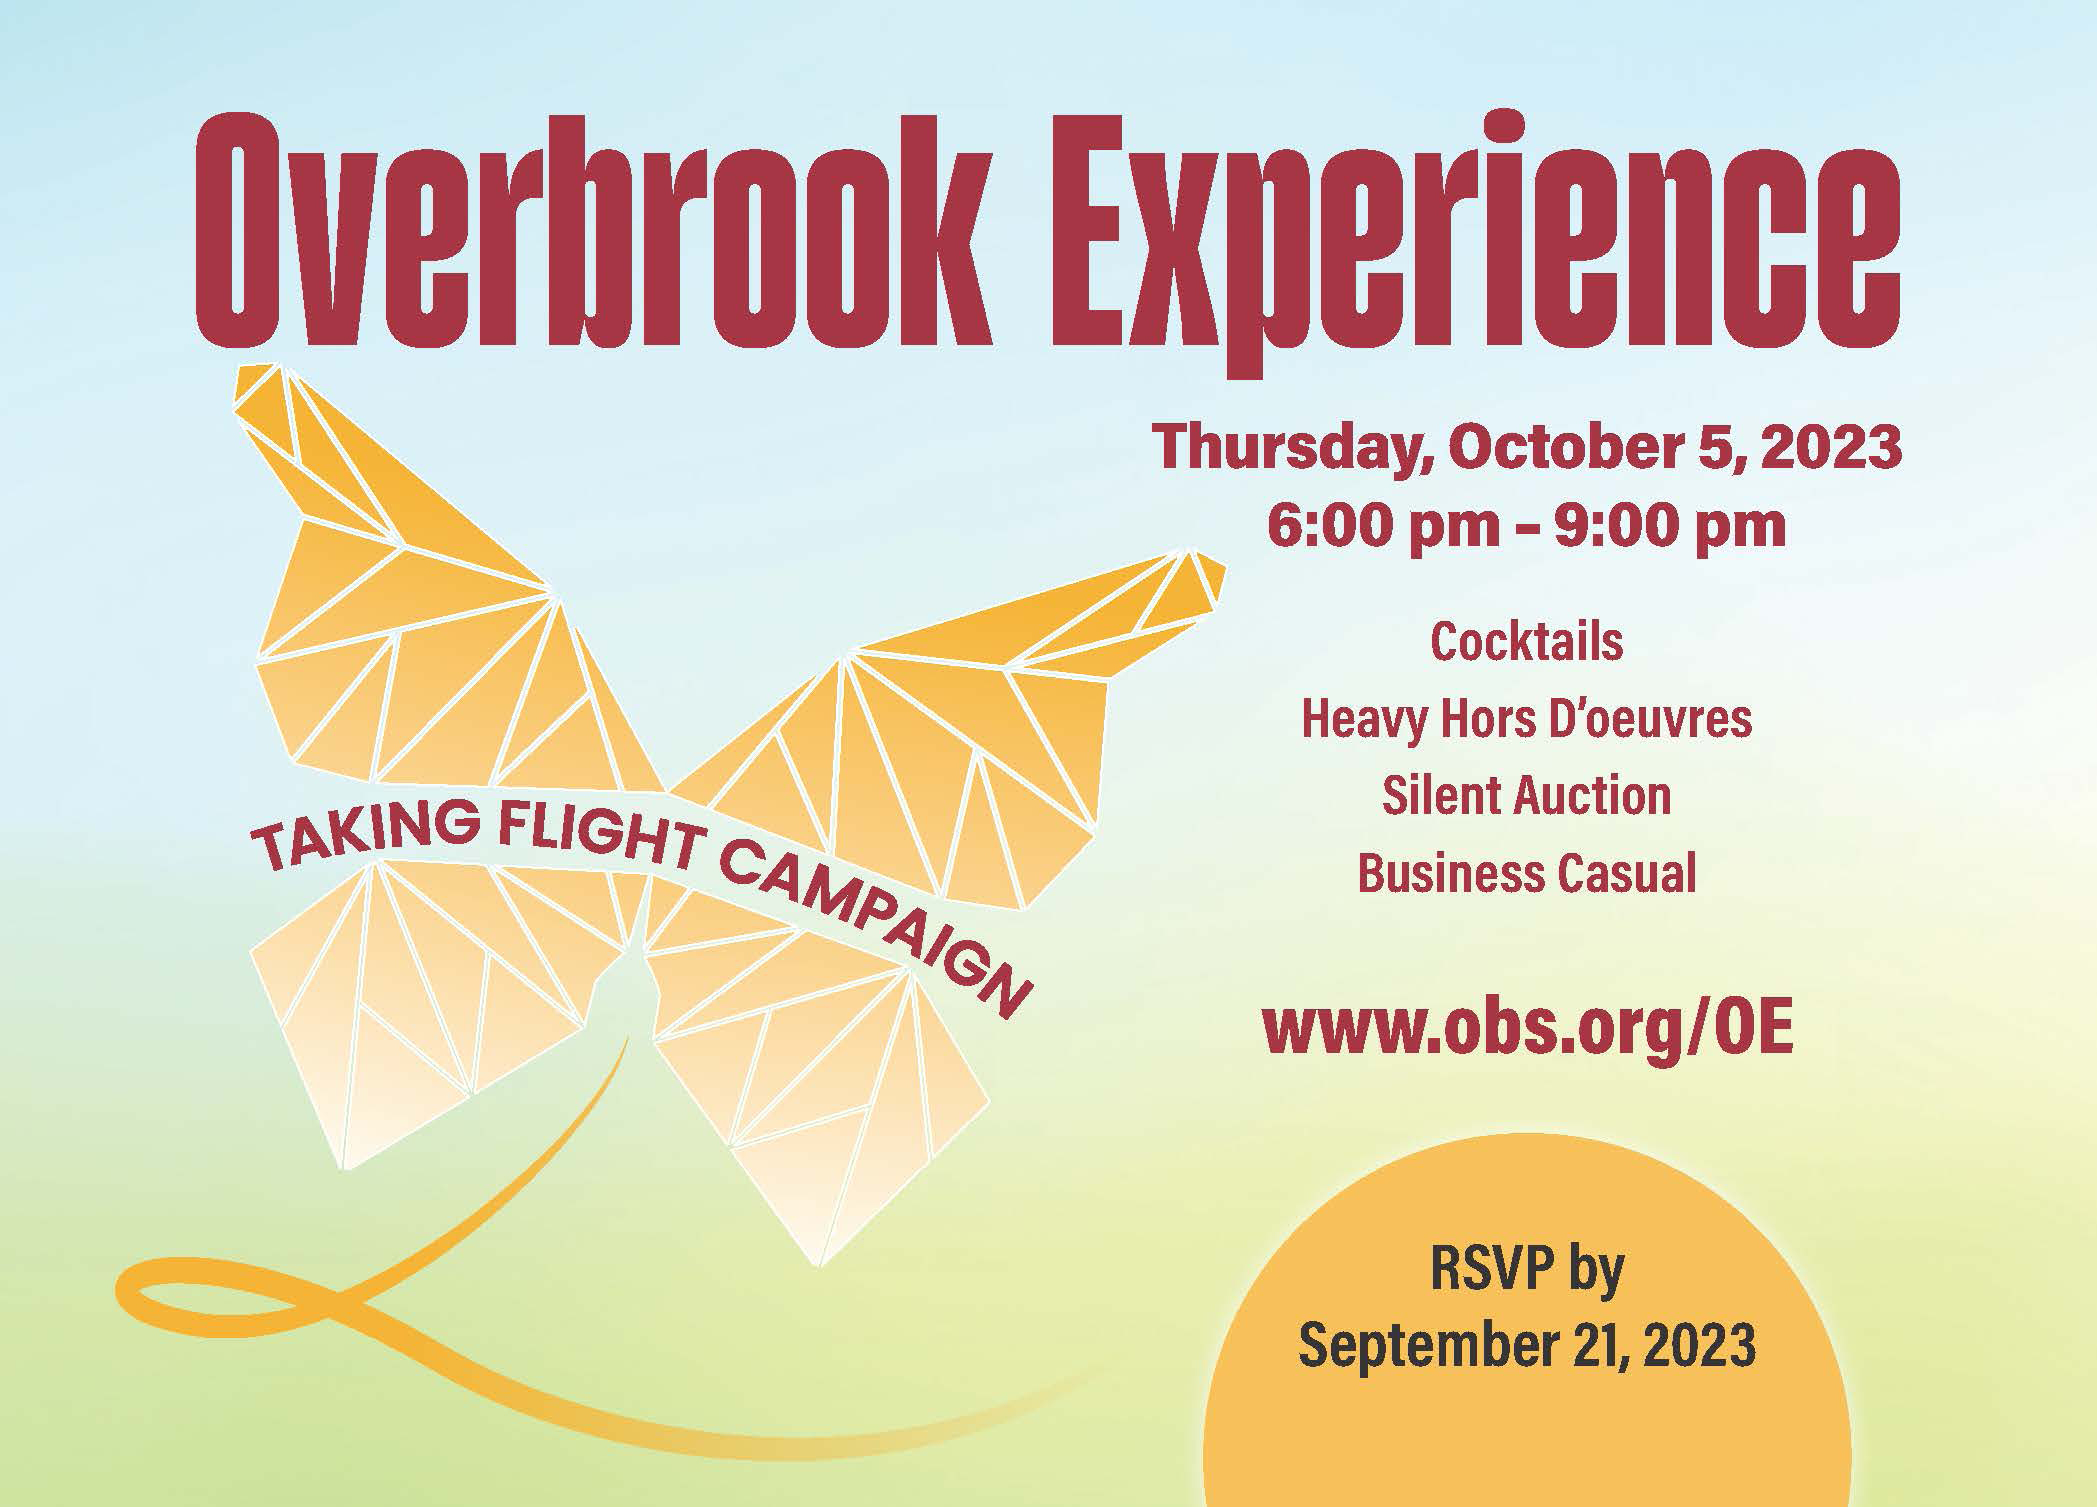 Back of Overbrook Experience invite. Thursday, October 5, 2023 6:00 pm - 9:00 pm. Cocktails, Heavy Hors D'oeuvres, Silent Auction, Business Casual. www.obs.org/OE. RSVP by September 21, 2023.